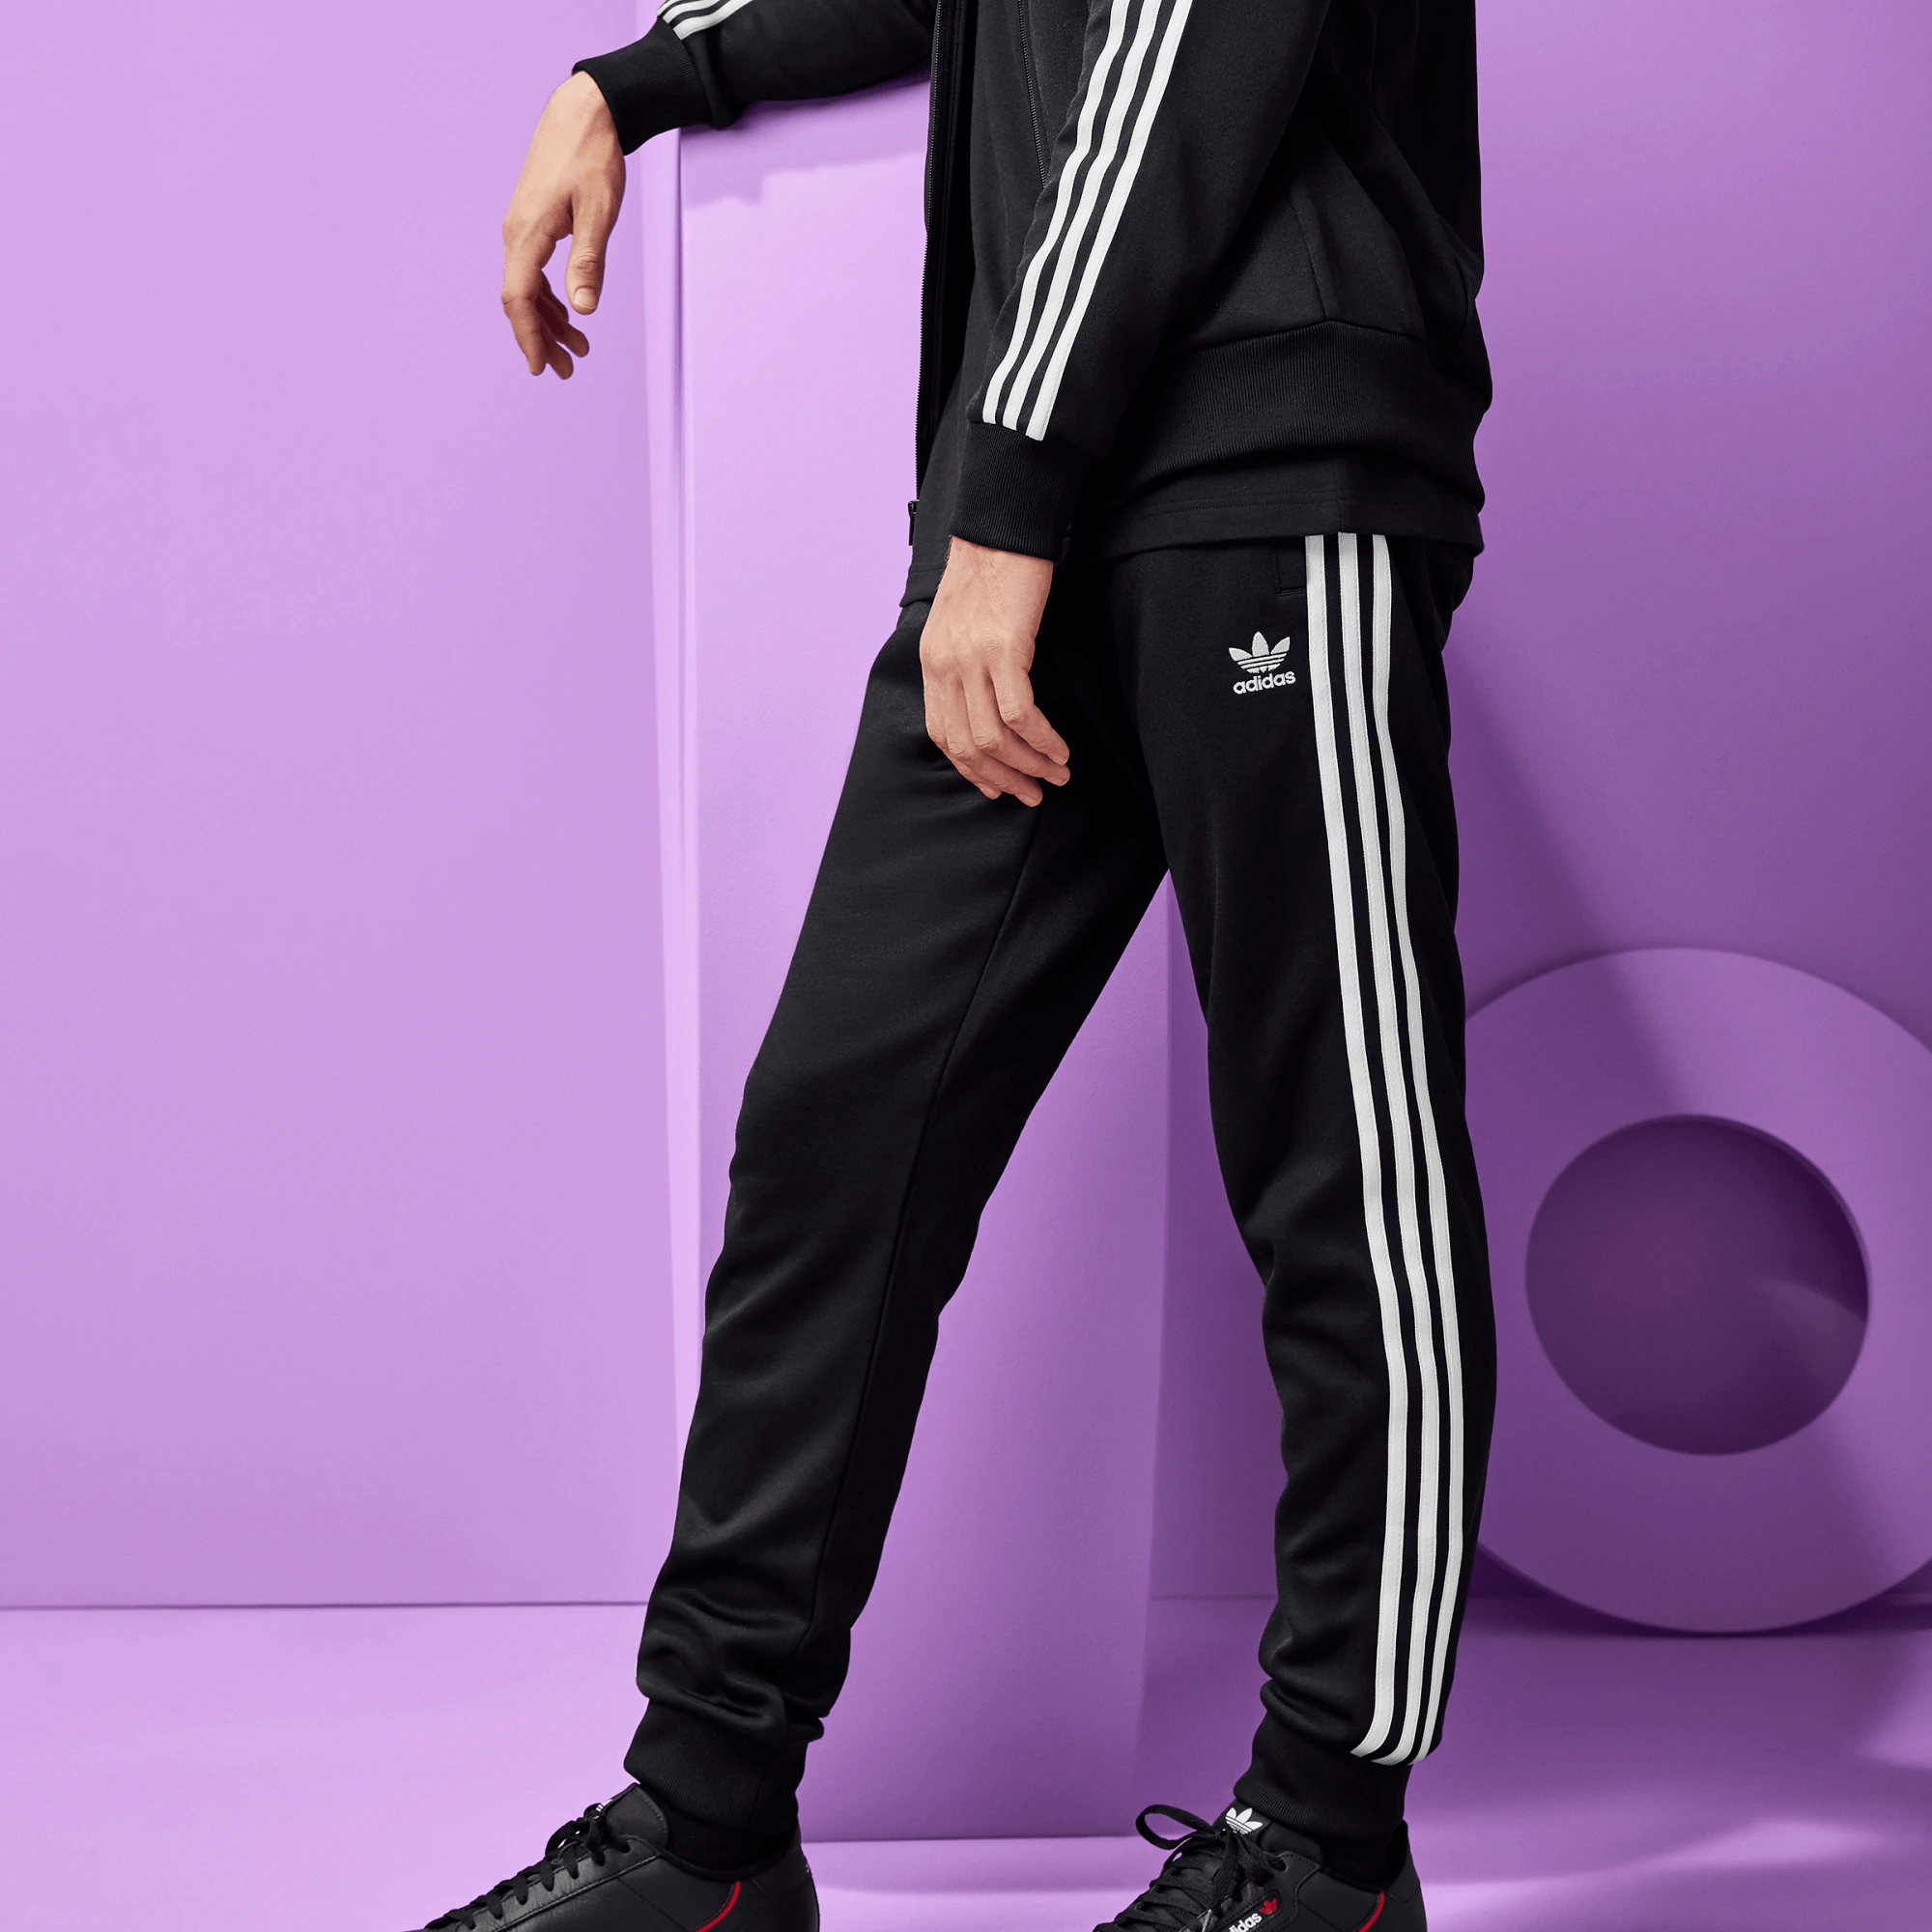 Adidas Must Have 3 Stripes Pants - Size Asian Medium & Large Triple Black  Colorway, Men's Fashion, Bottoms, Joggers on Carousell